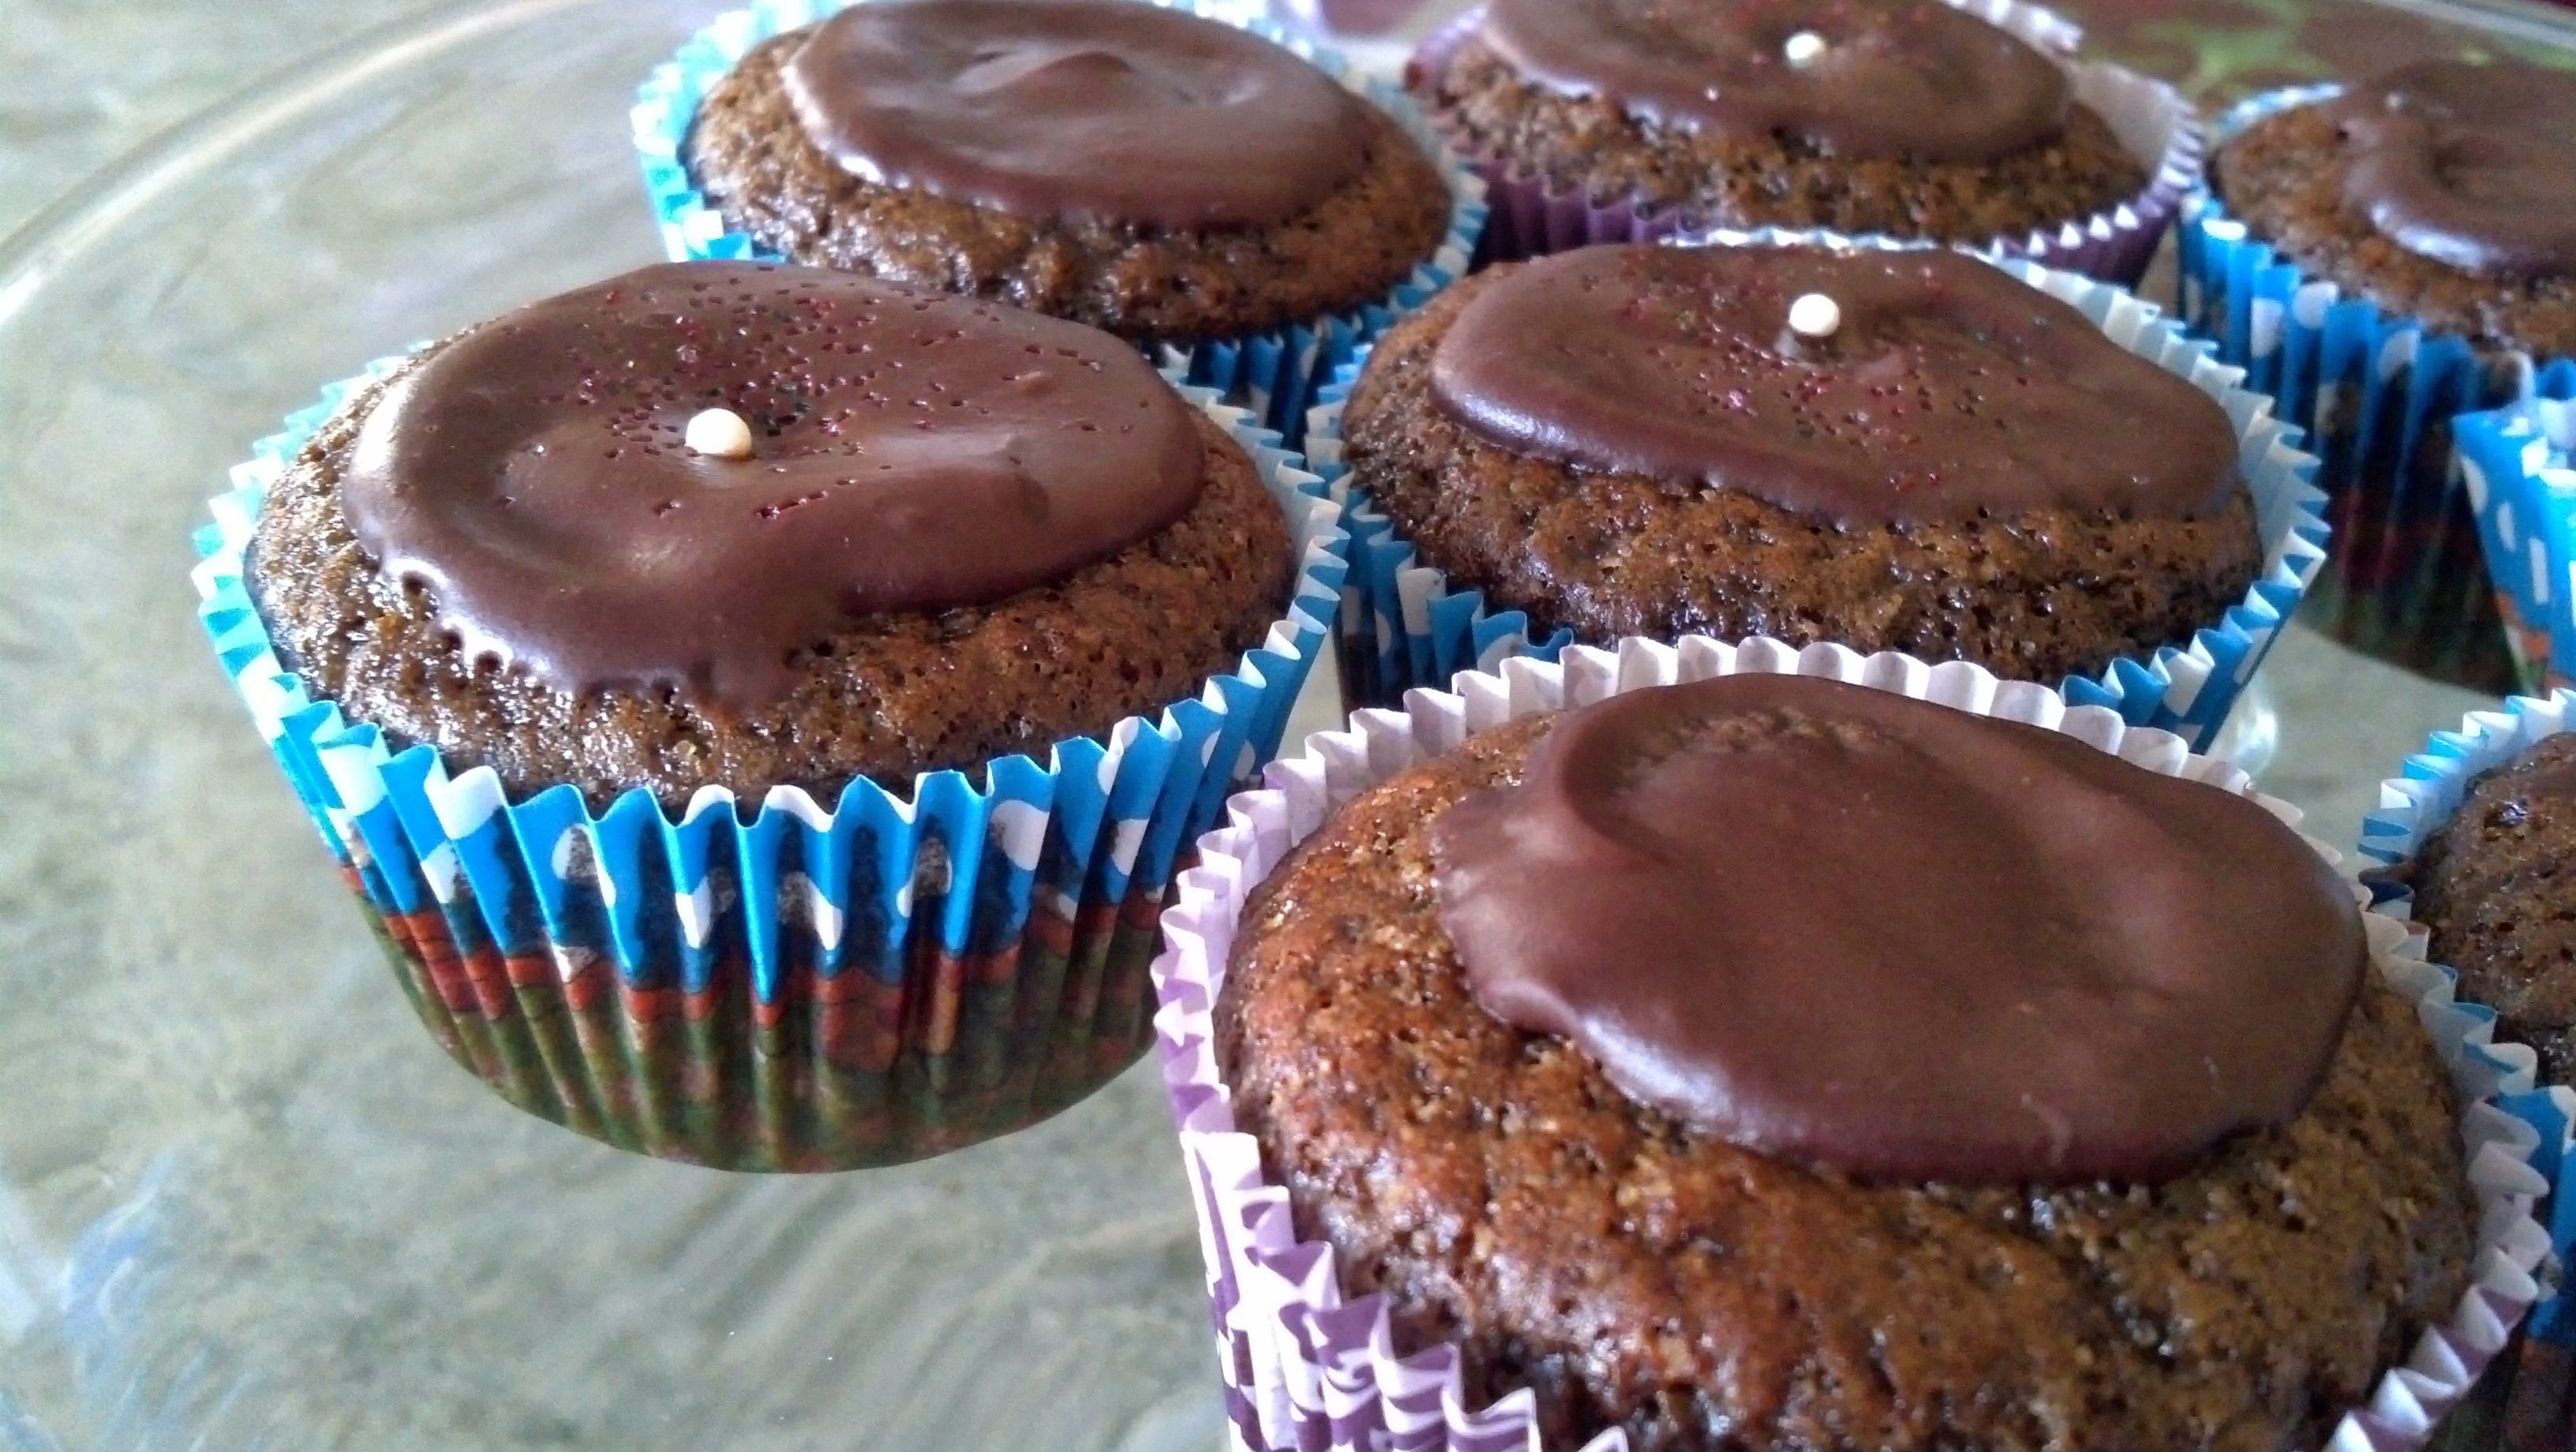 Cupcakes with Filling